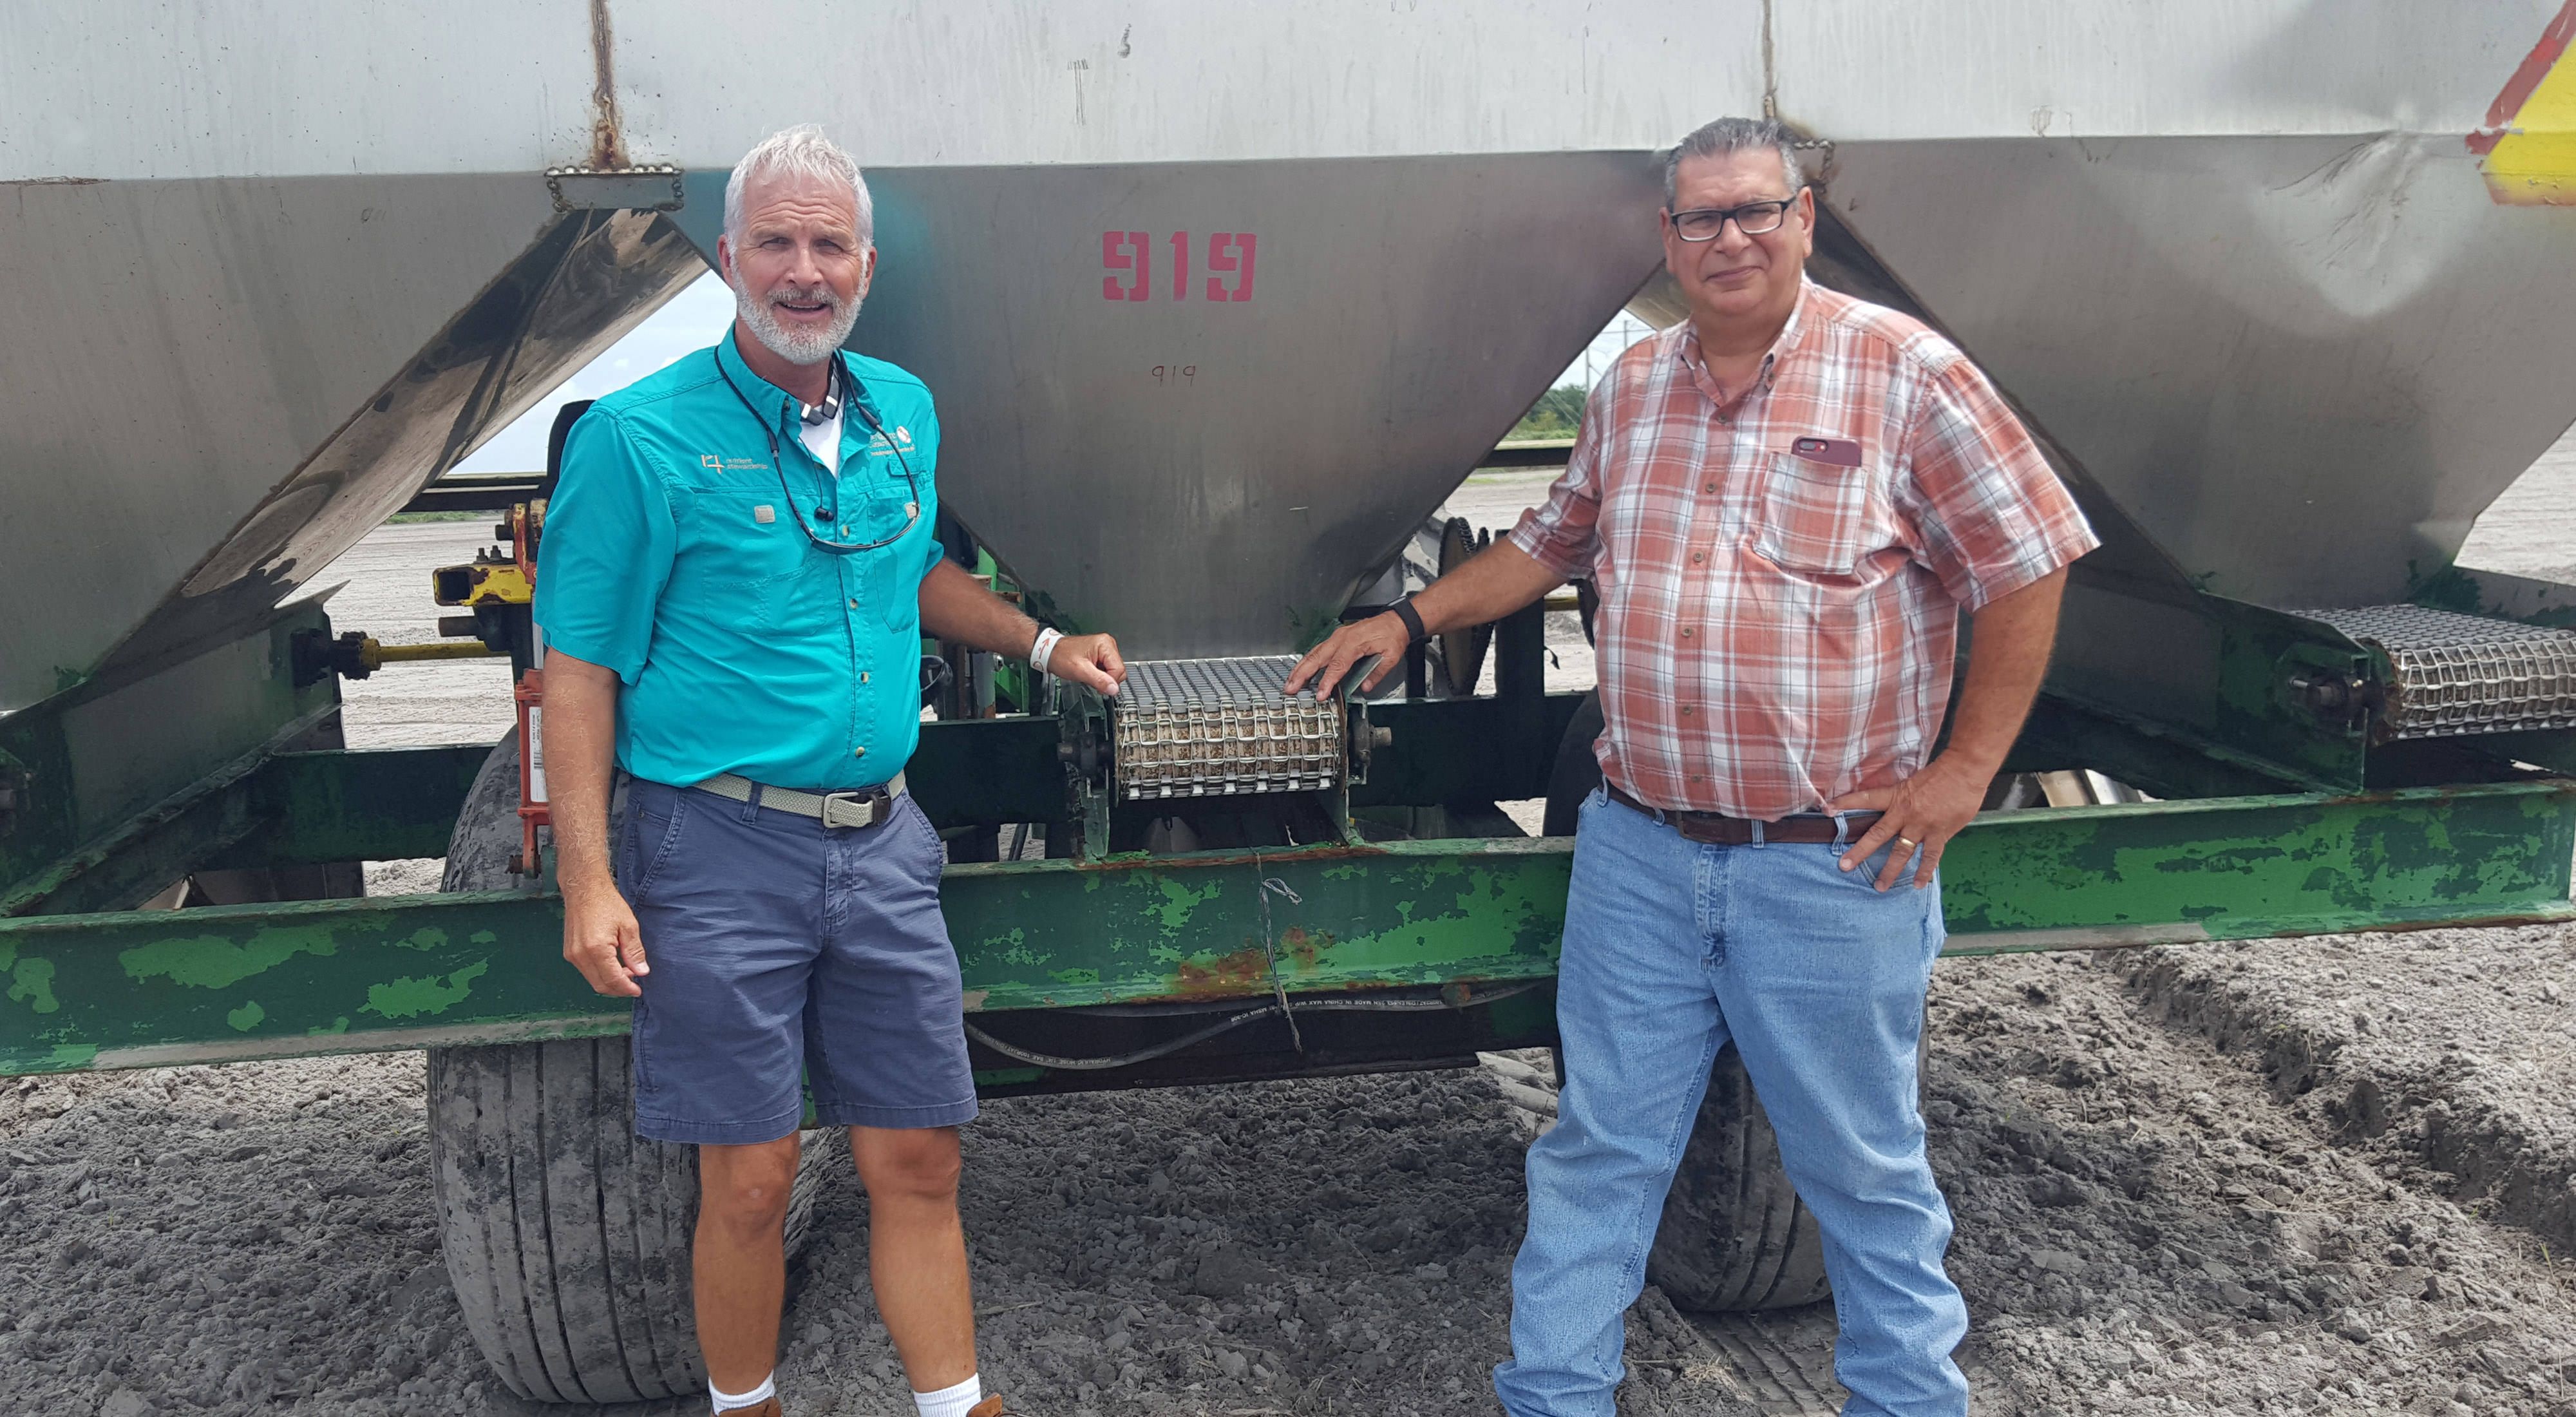 TNC's David Royal (left) and Florida farmer Robert Sam had many conversations about how conservation ag practices can save money, produce a good crop and help the environment.